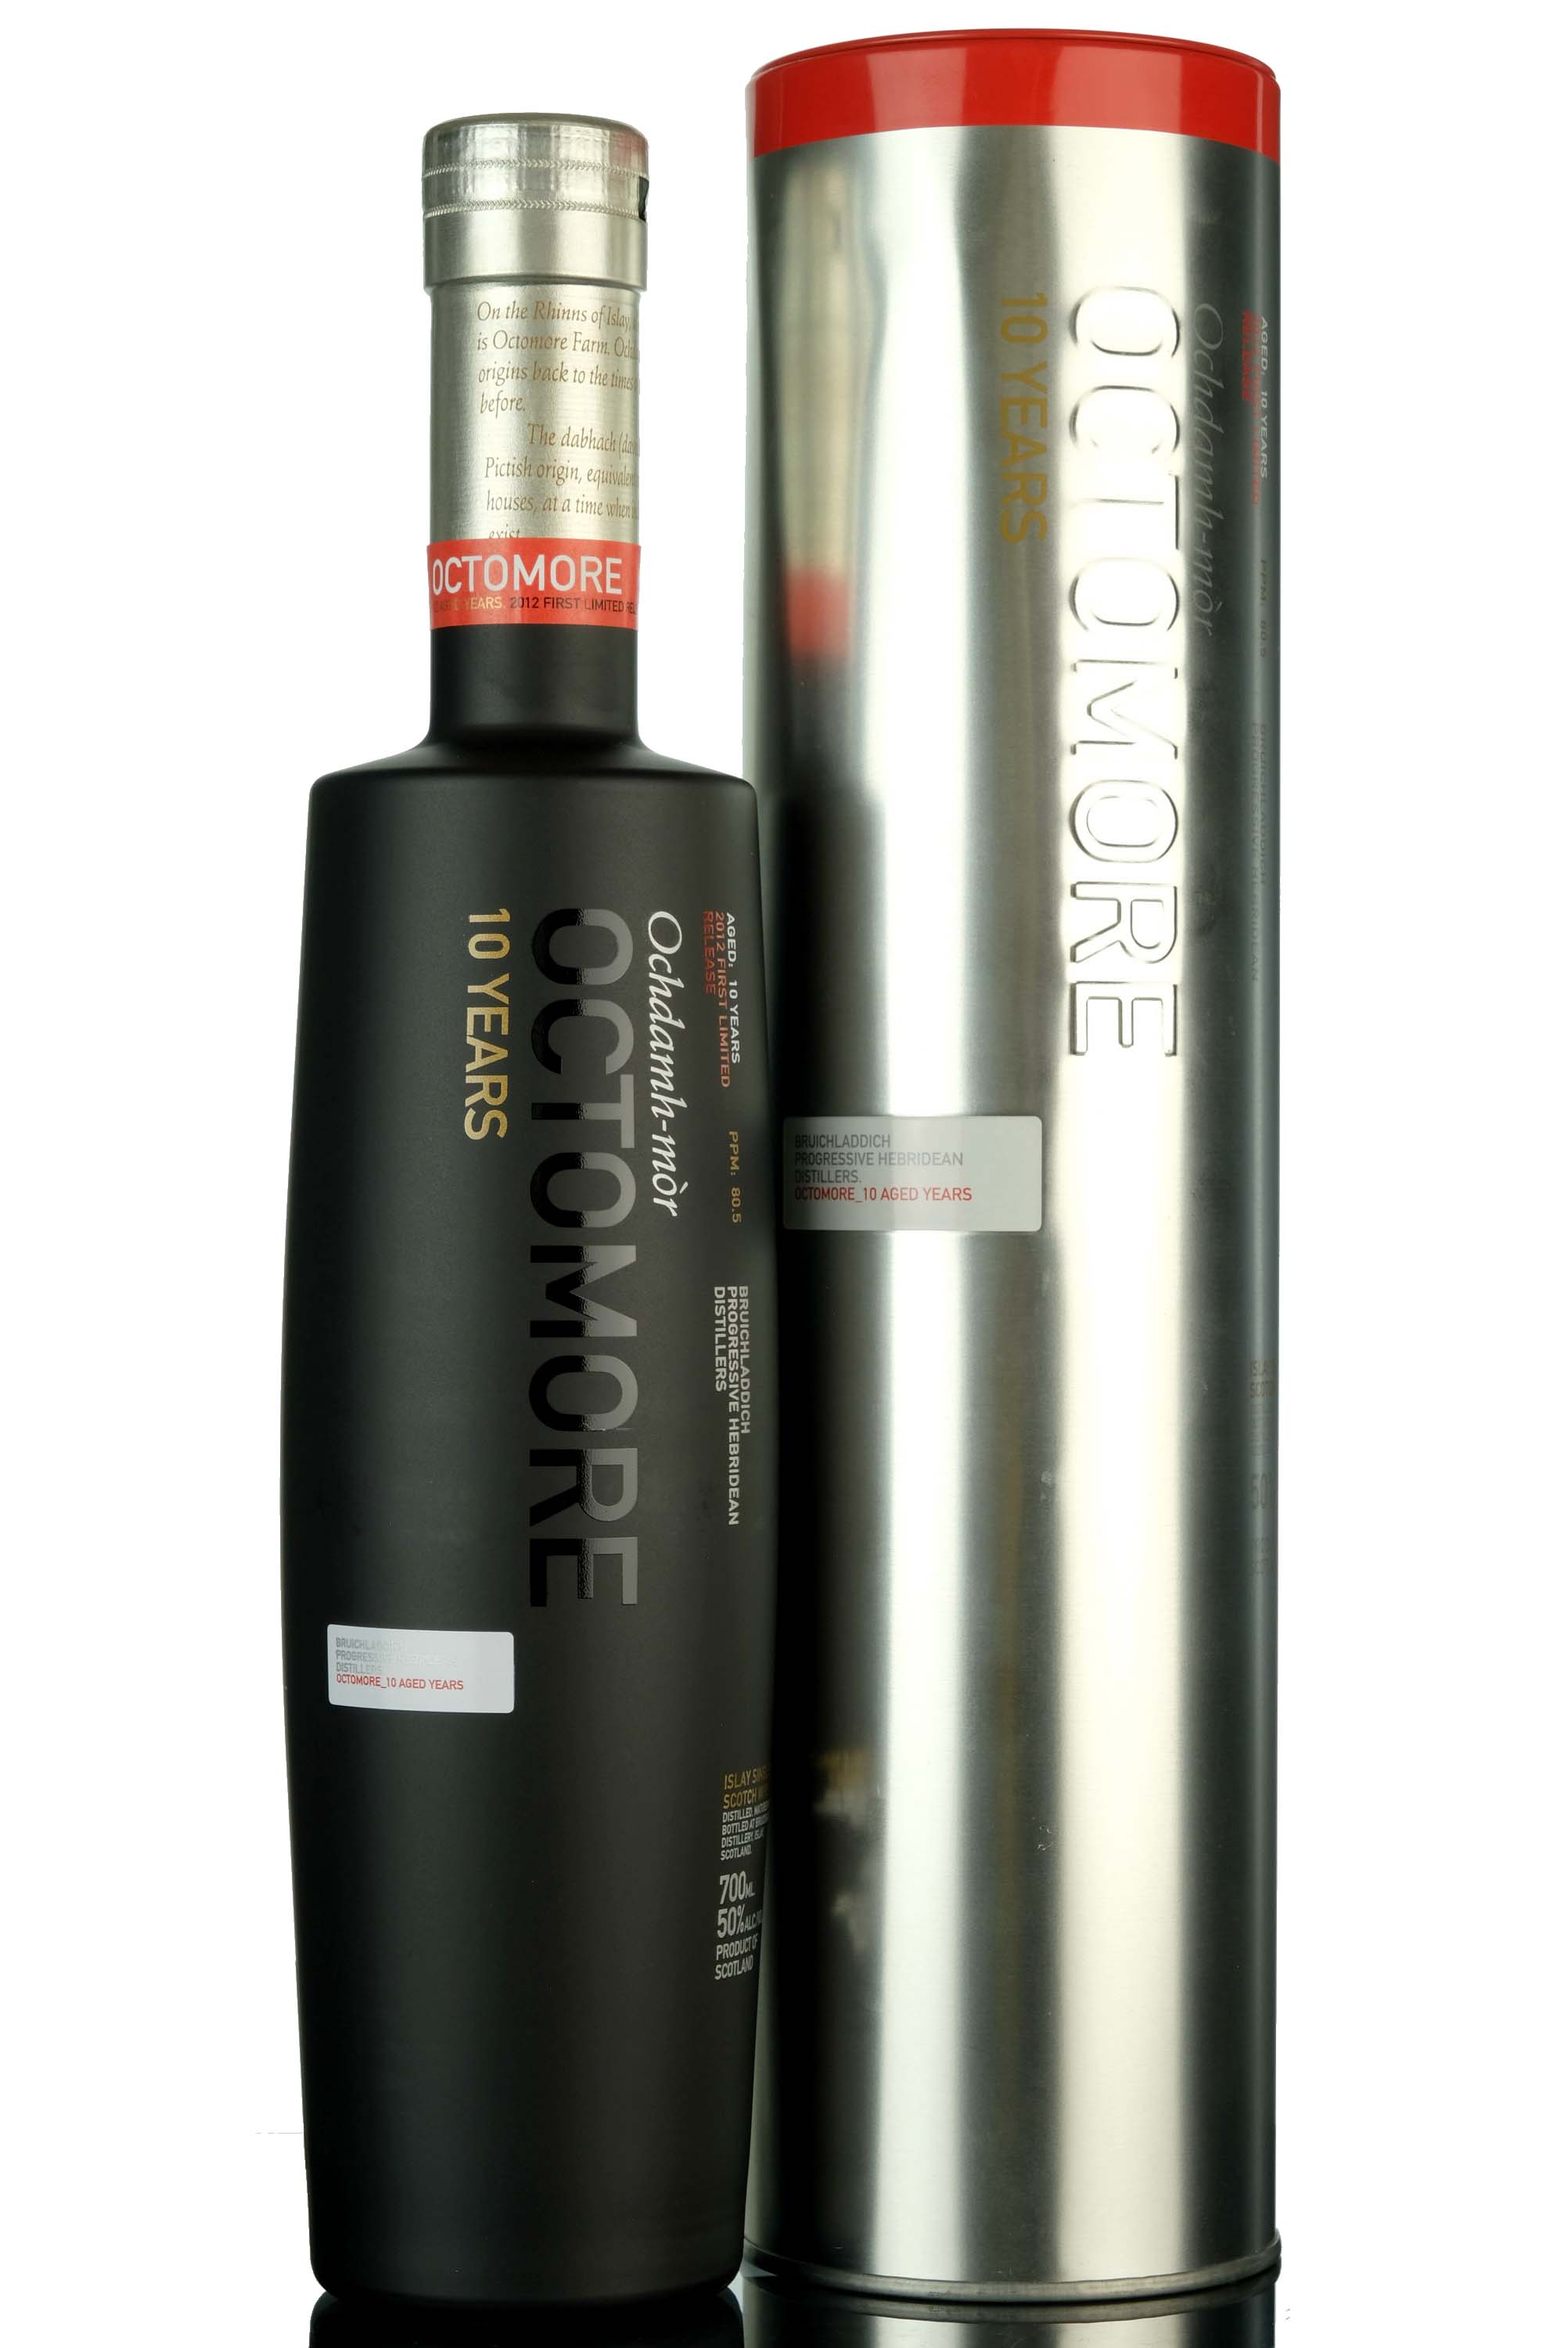 Octomore 10 Year Old - First Release 2012